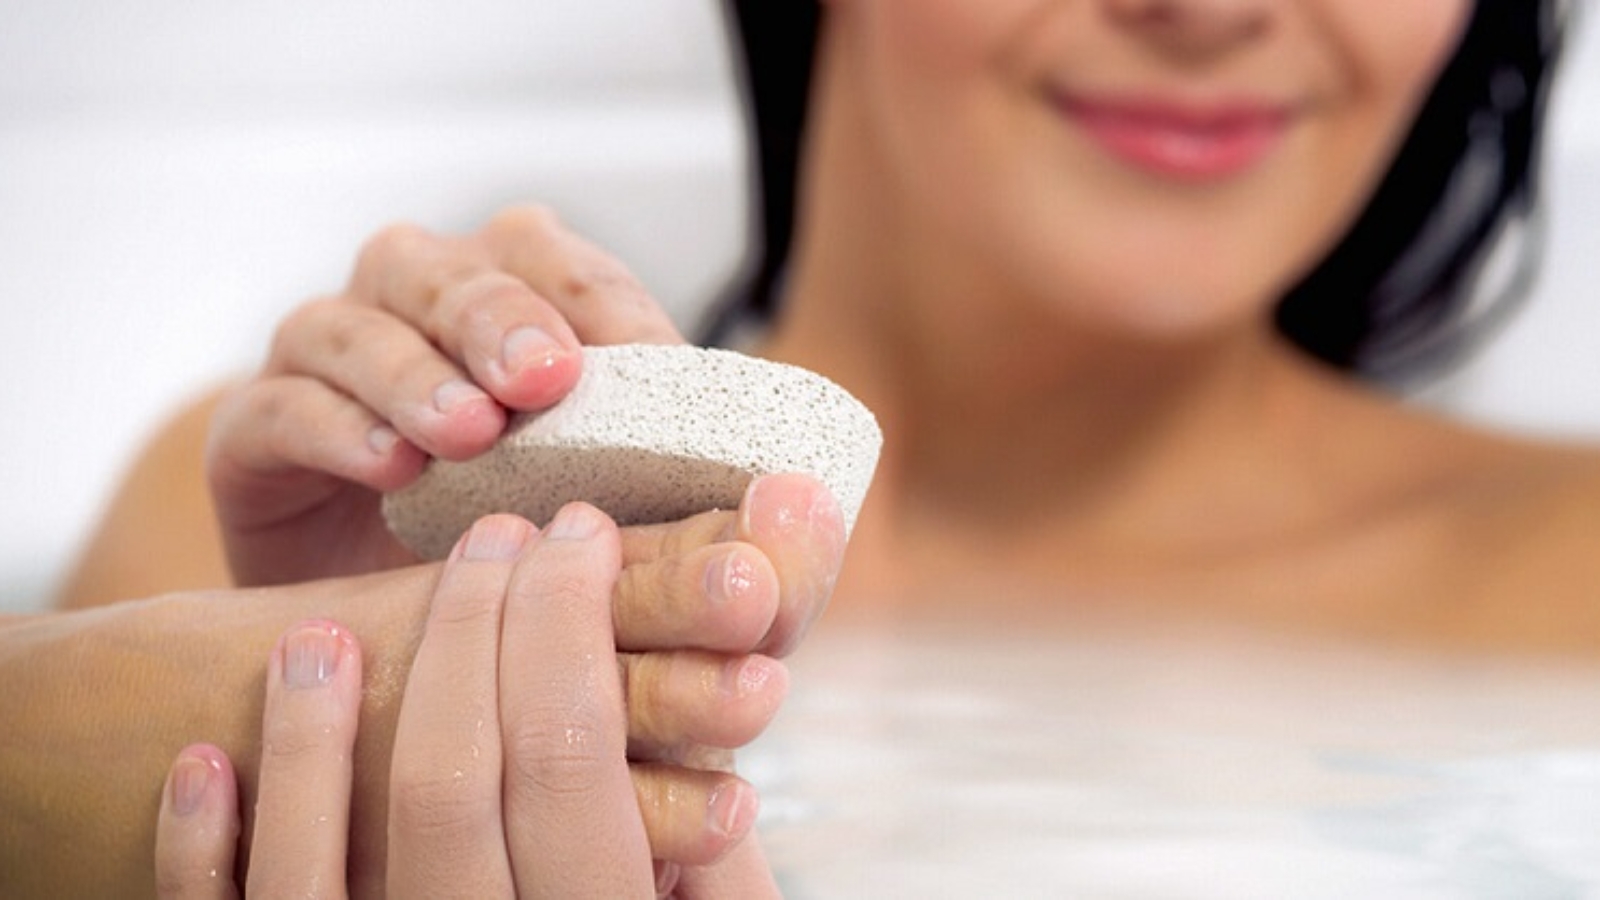 How to use a pumice stone